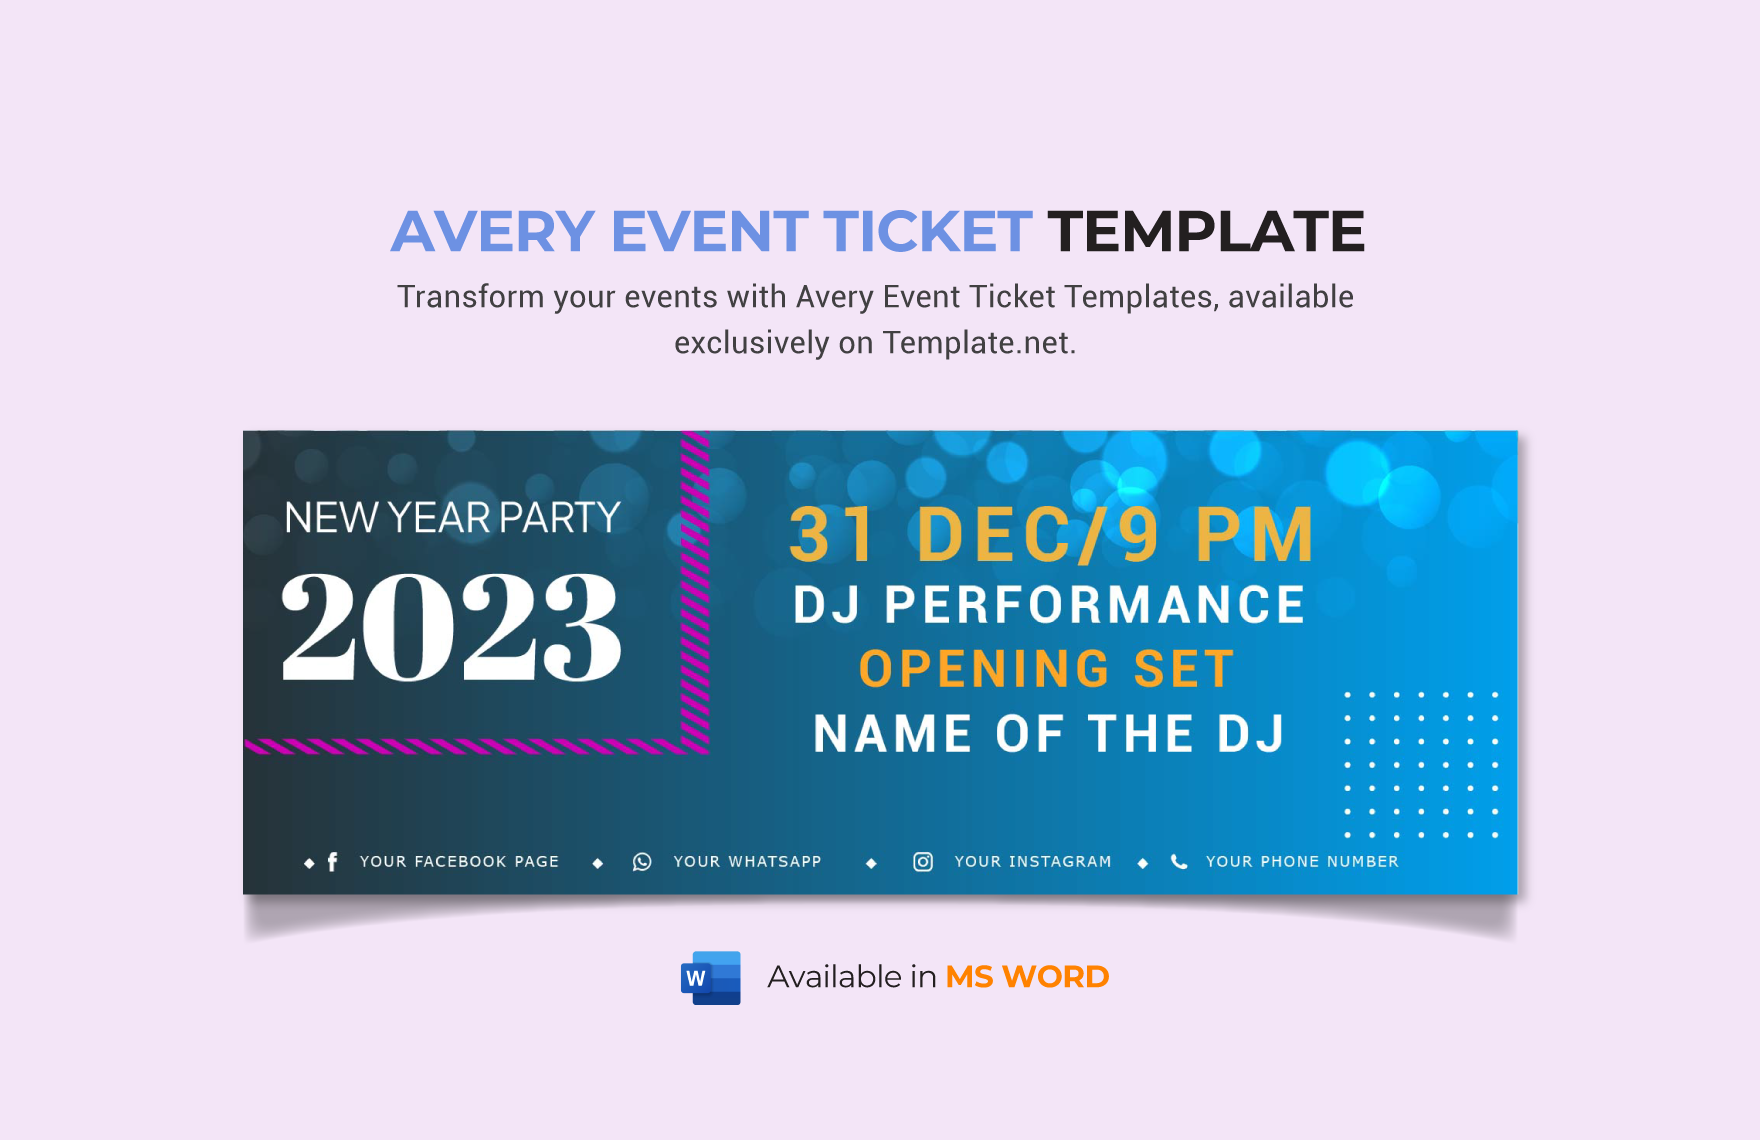 Avery Event Ticket Template